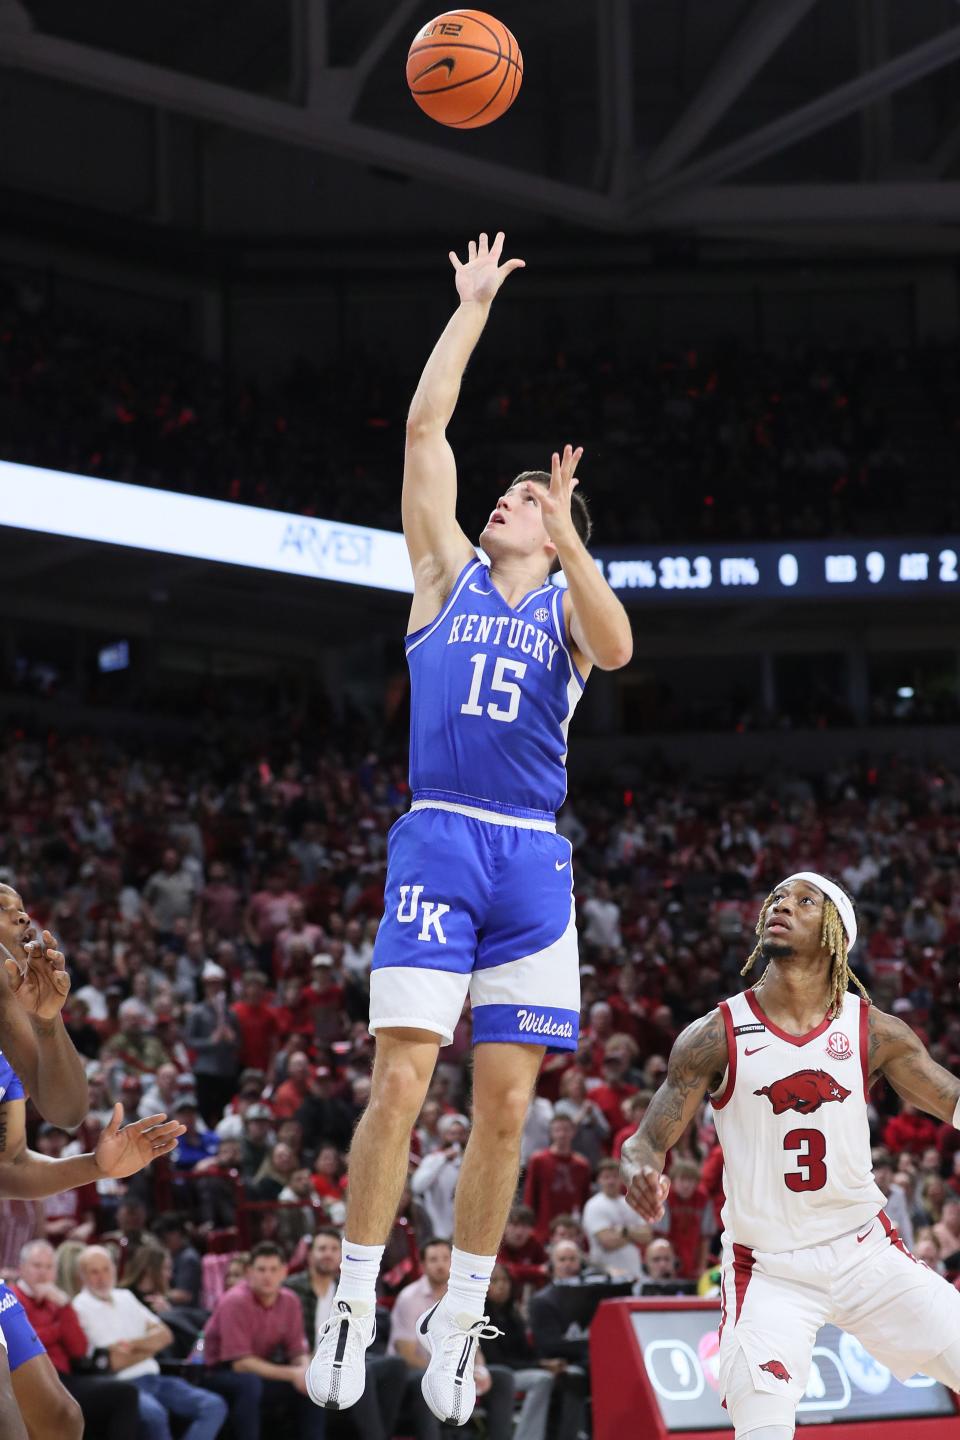 Kentucky freshman guard Reed Sheppard shoots in the first half against the host Razorbacks. Sheppard scored 14 points in the Wildcats' 63-57 victory Saturday night.